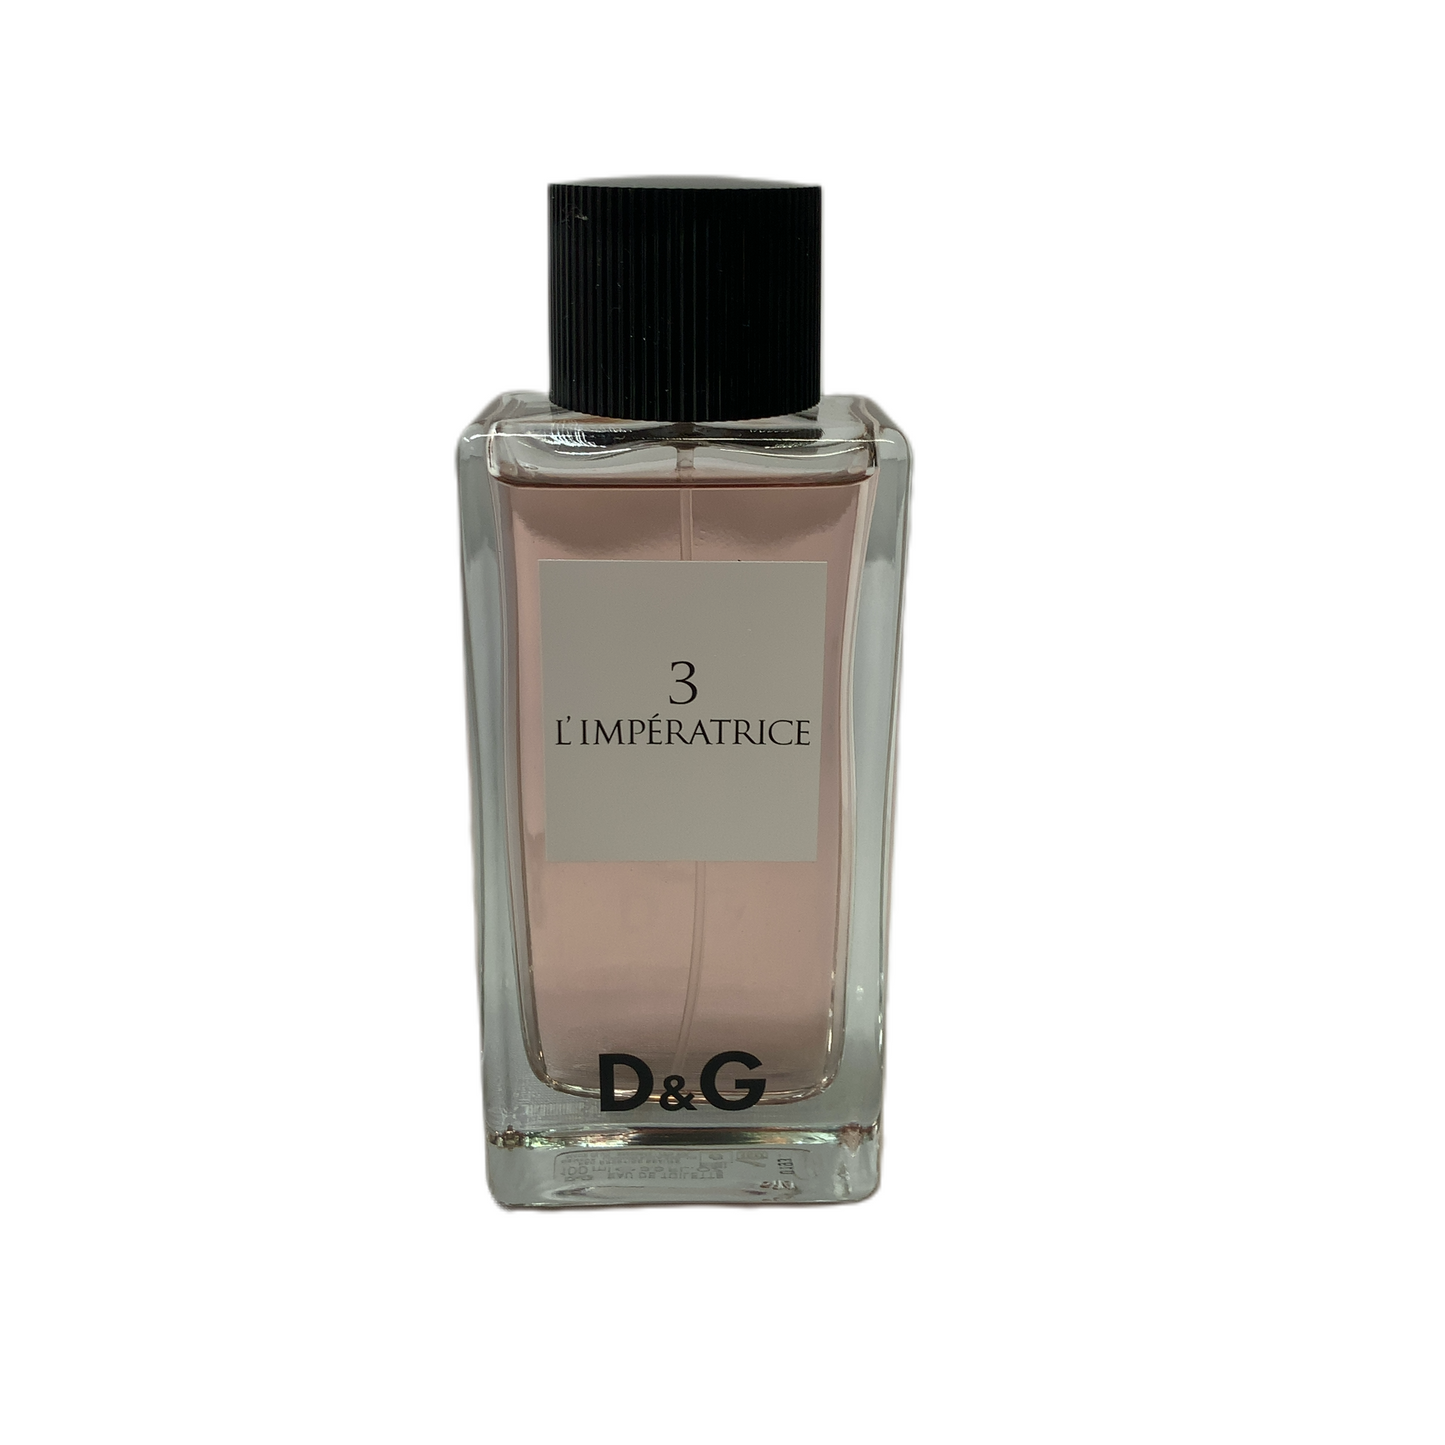 Fragrance Luxury Designer By Dolce And Gabbana